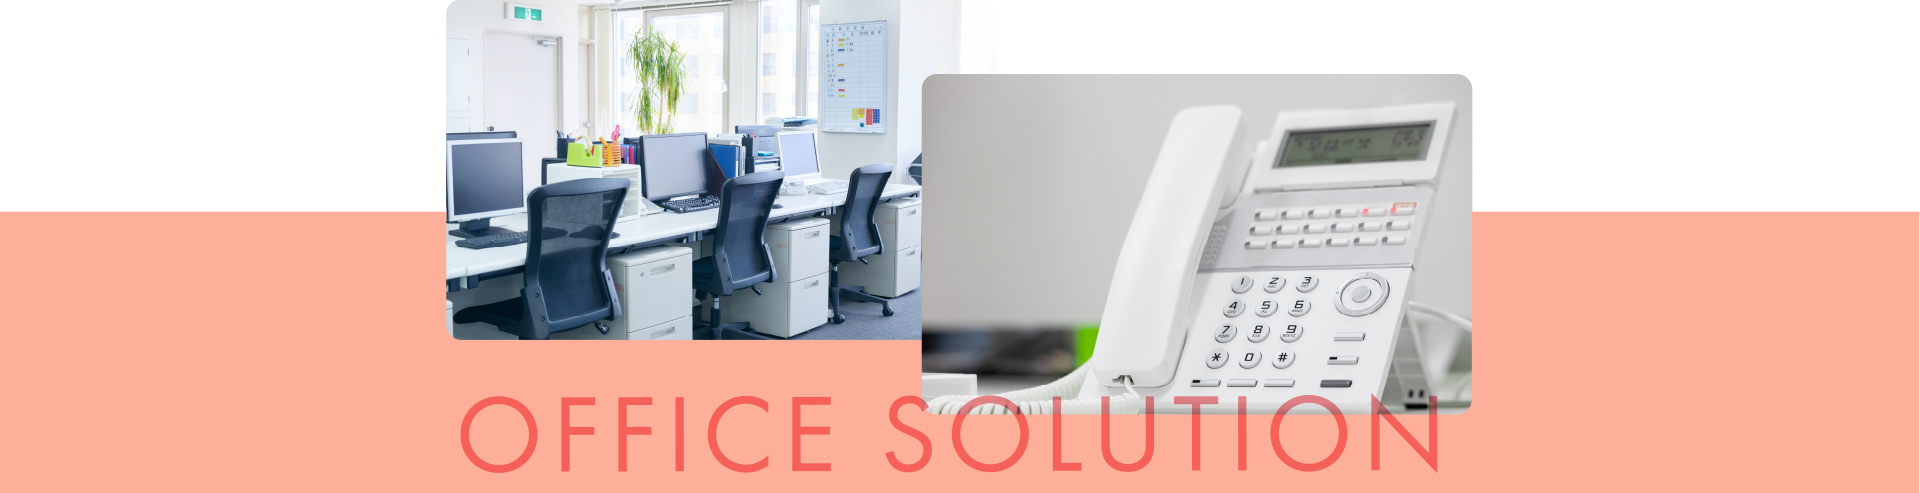 OFFICE SOLUTION